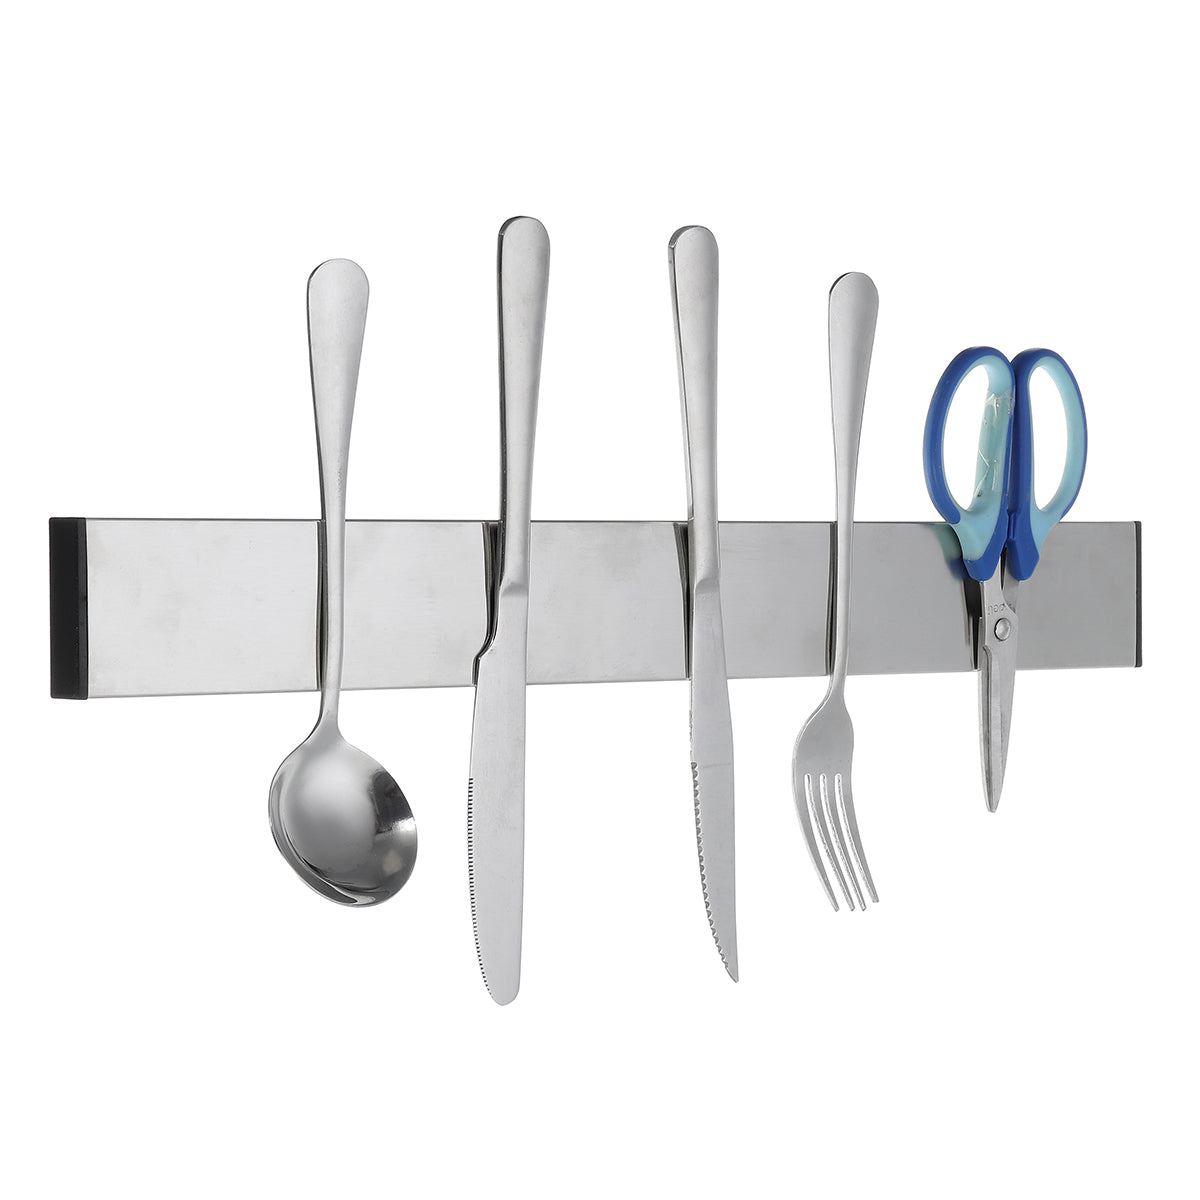 Stainless Steel Magnetic Kitchen Cutter Holder Wall Mounted Organizer Rack